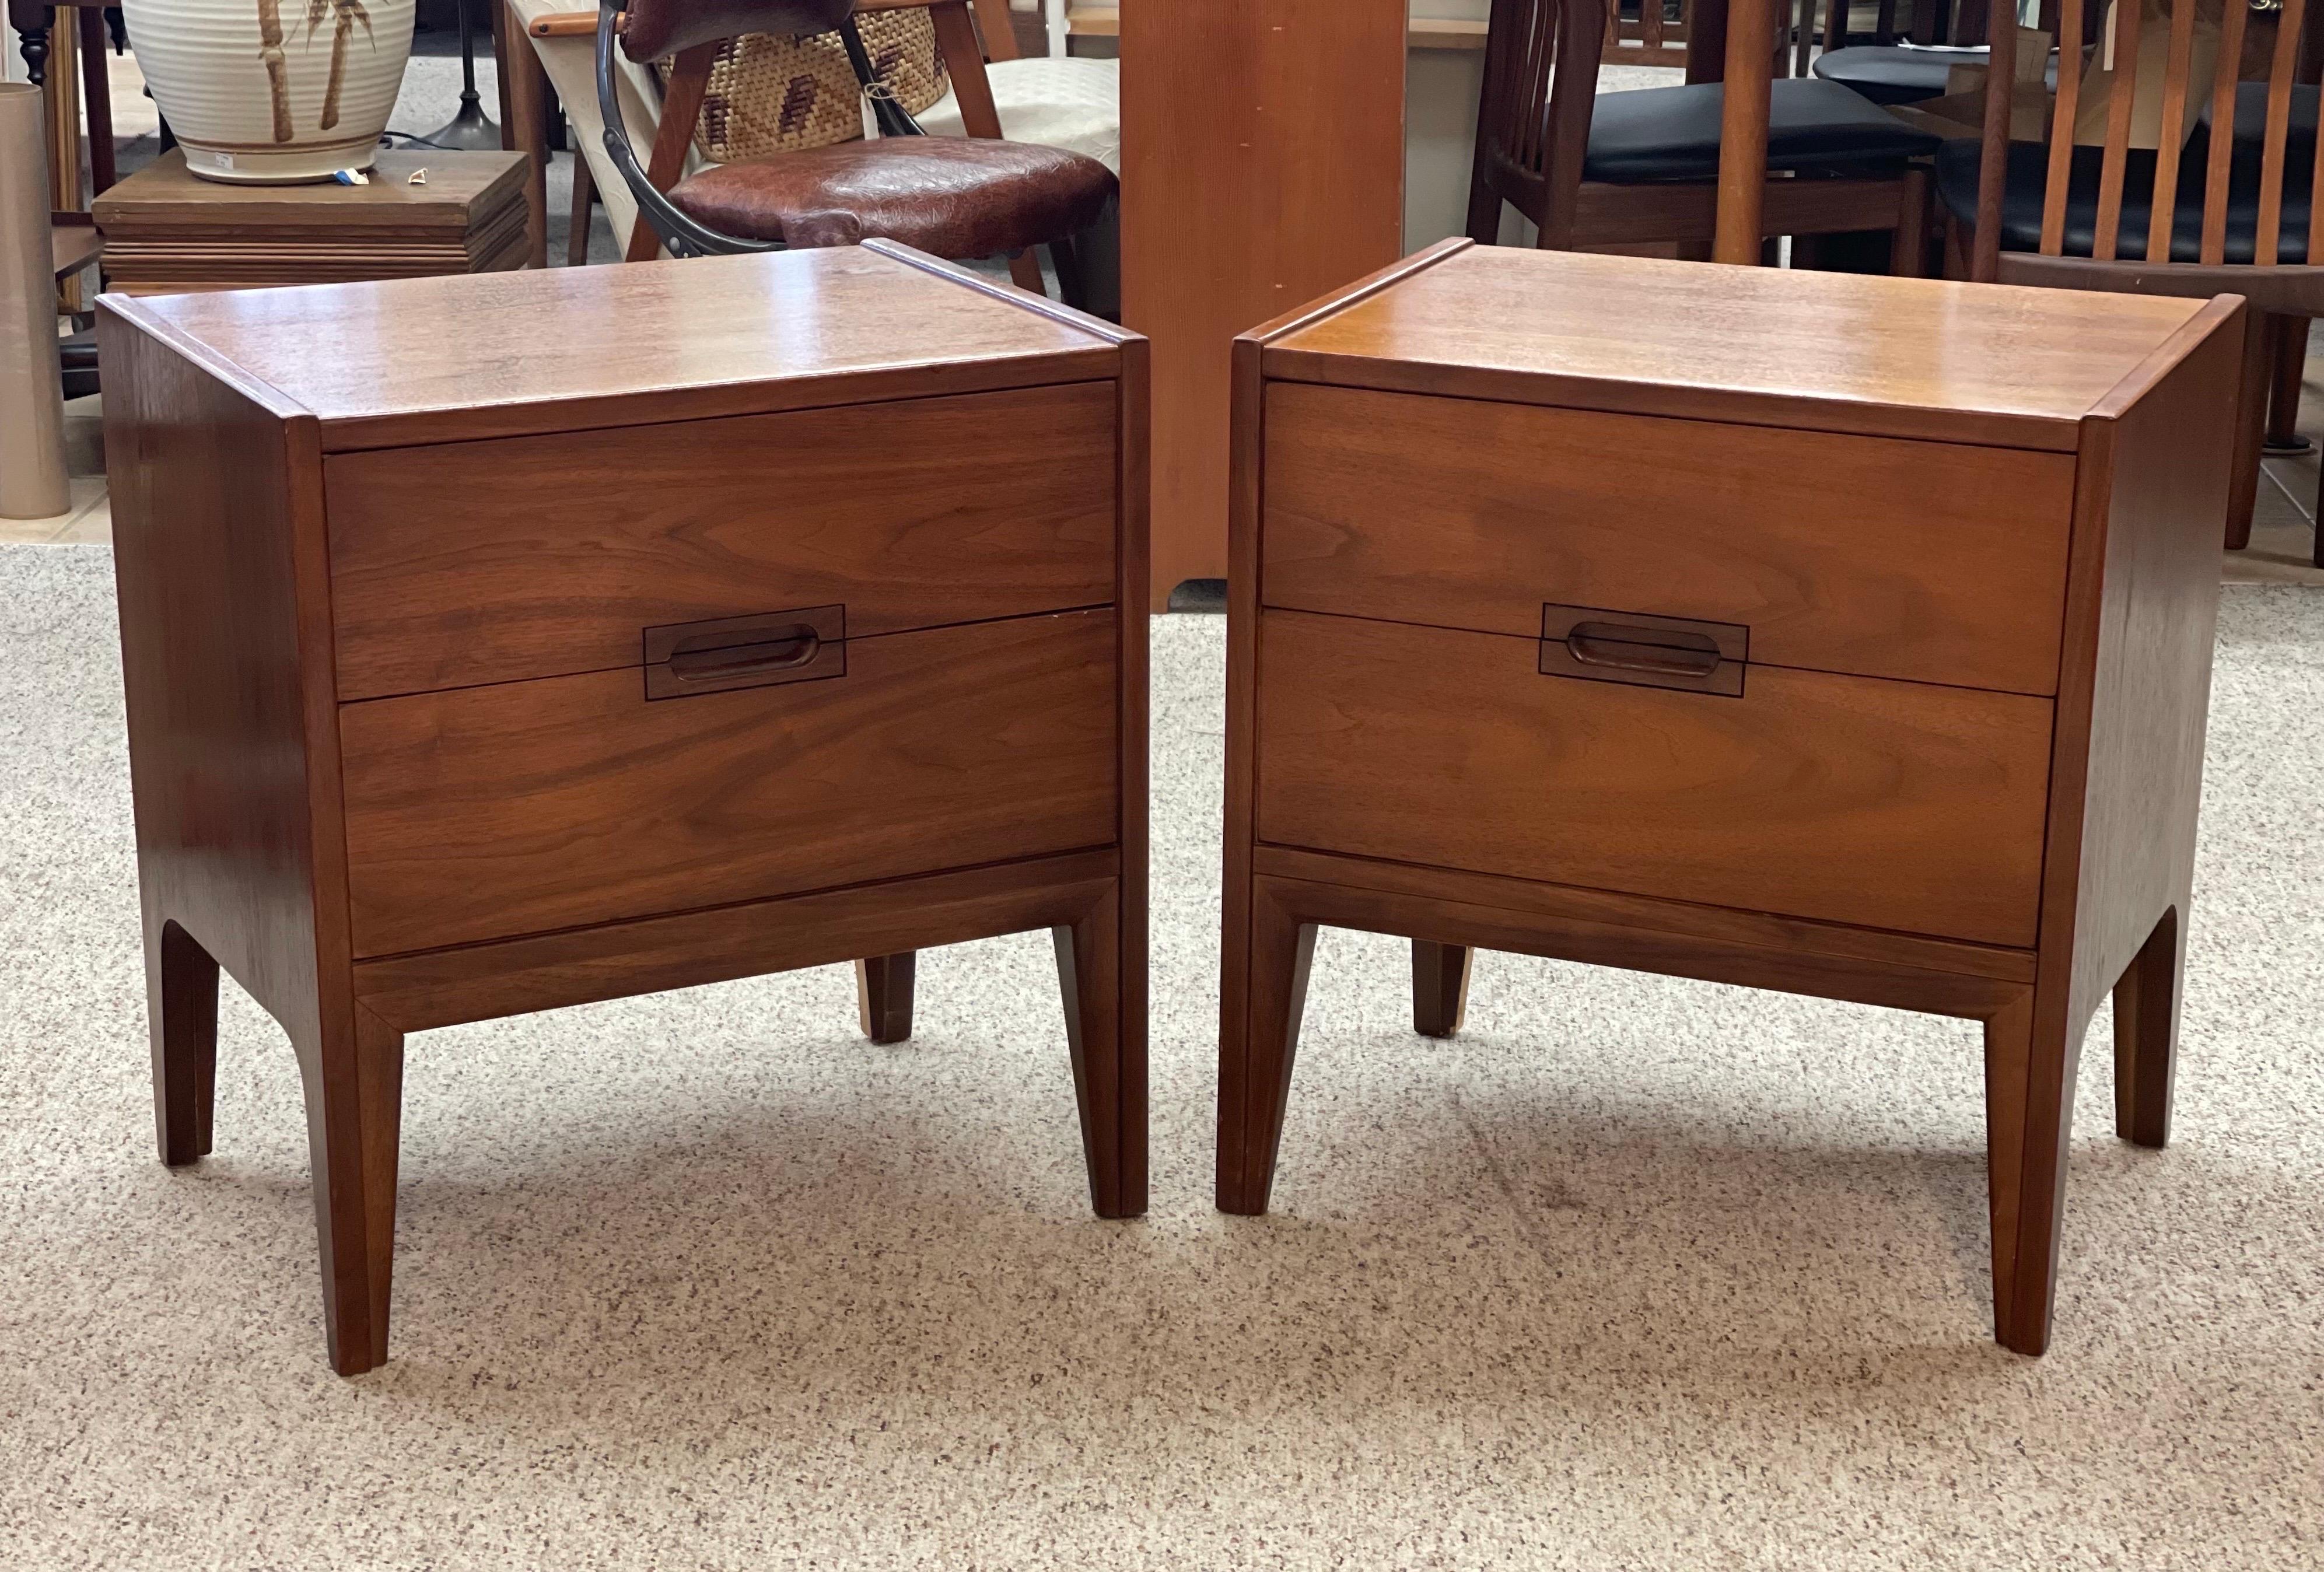 Vintage Mid-Century Modern Accent Tables Dovetail Drawers In Good Condition For Sale In Seattle, WA